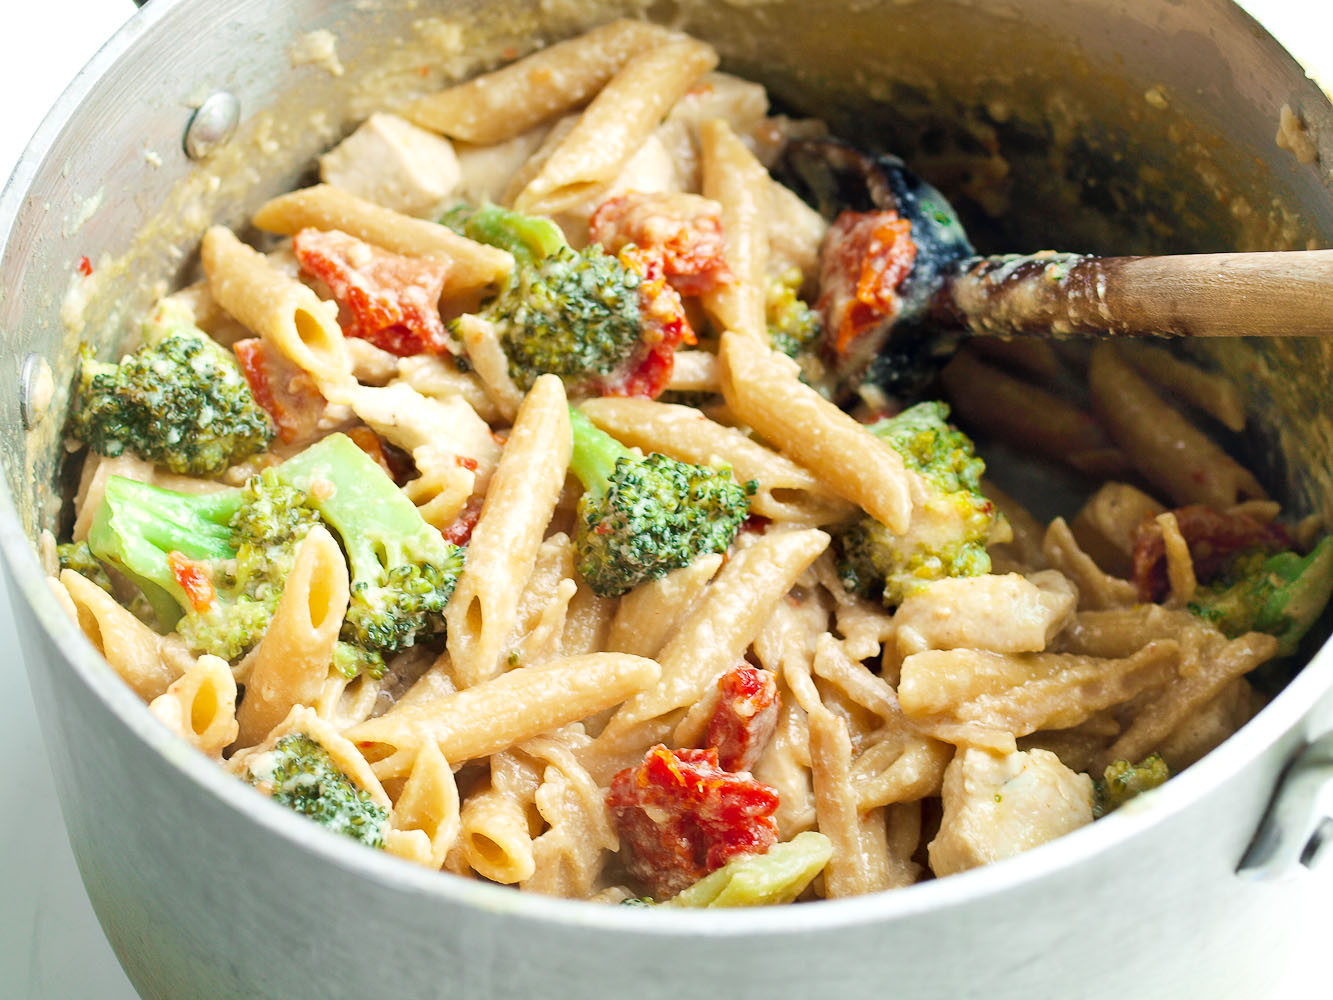 Fun Healthy Dinners For Kids
 Tangy e Pot Chicken and Veggie Pasta Dinner